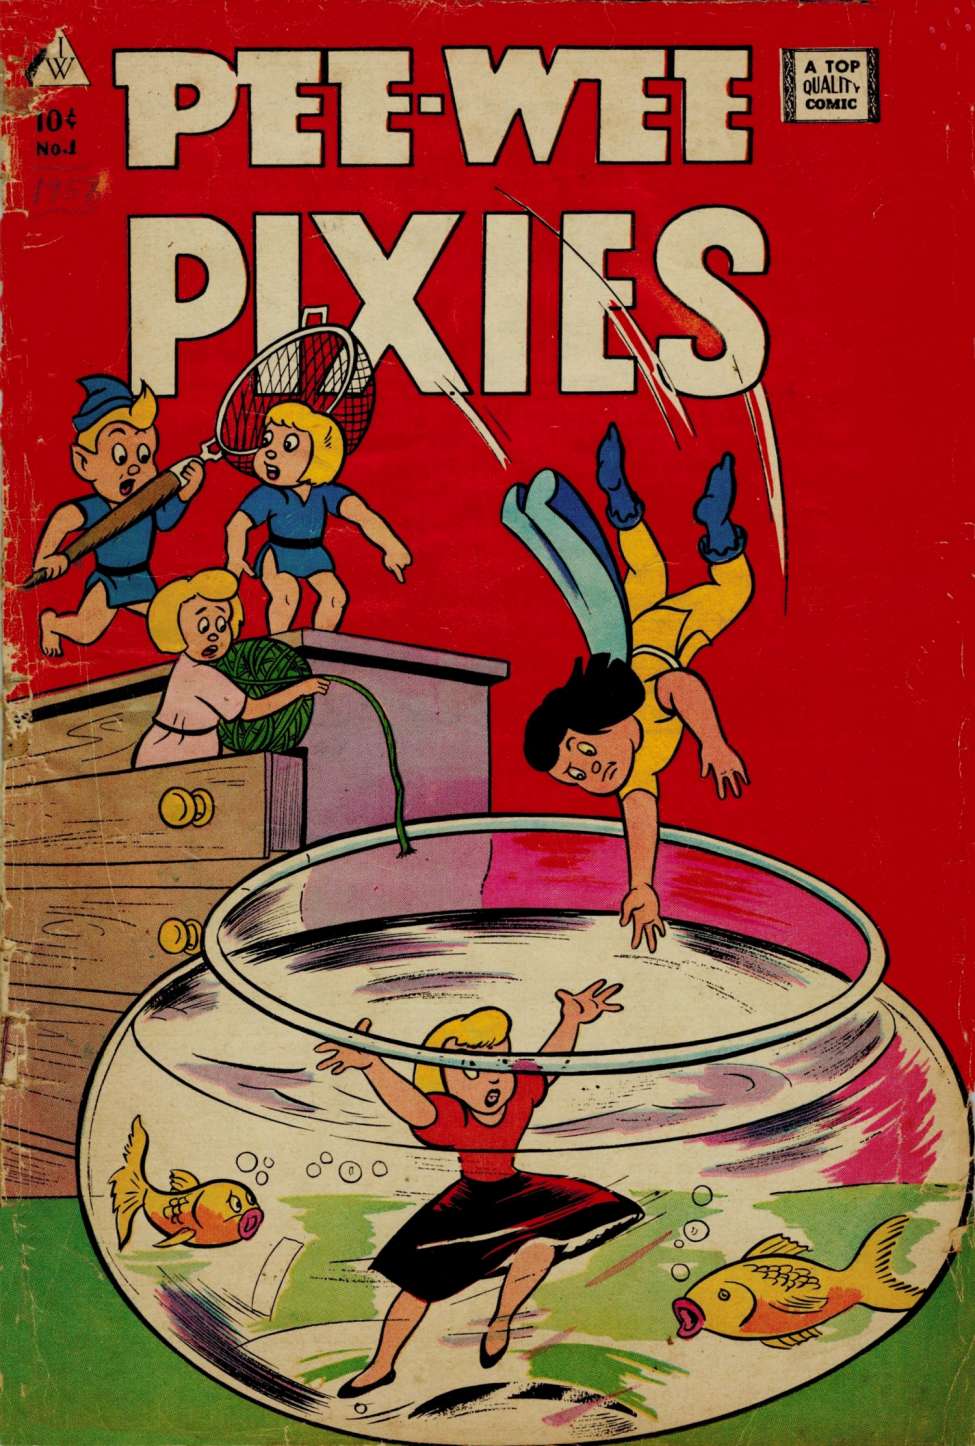 Book Cover For Pee-Wee Pixies 1